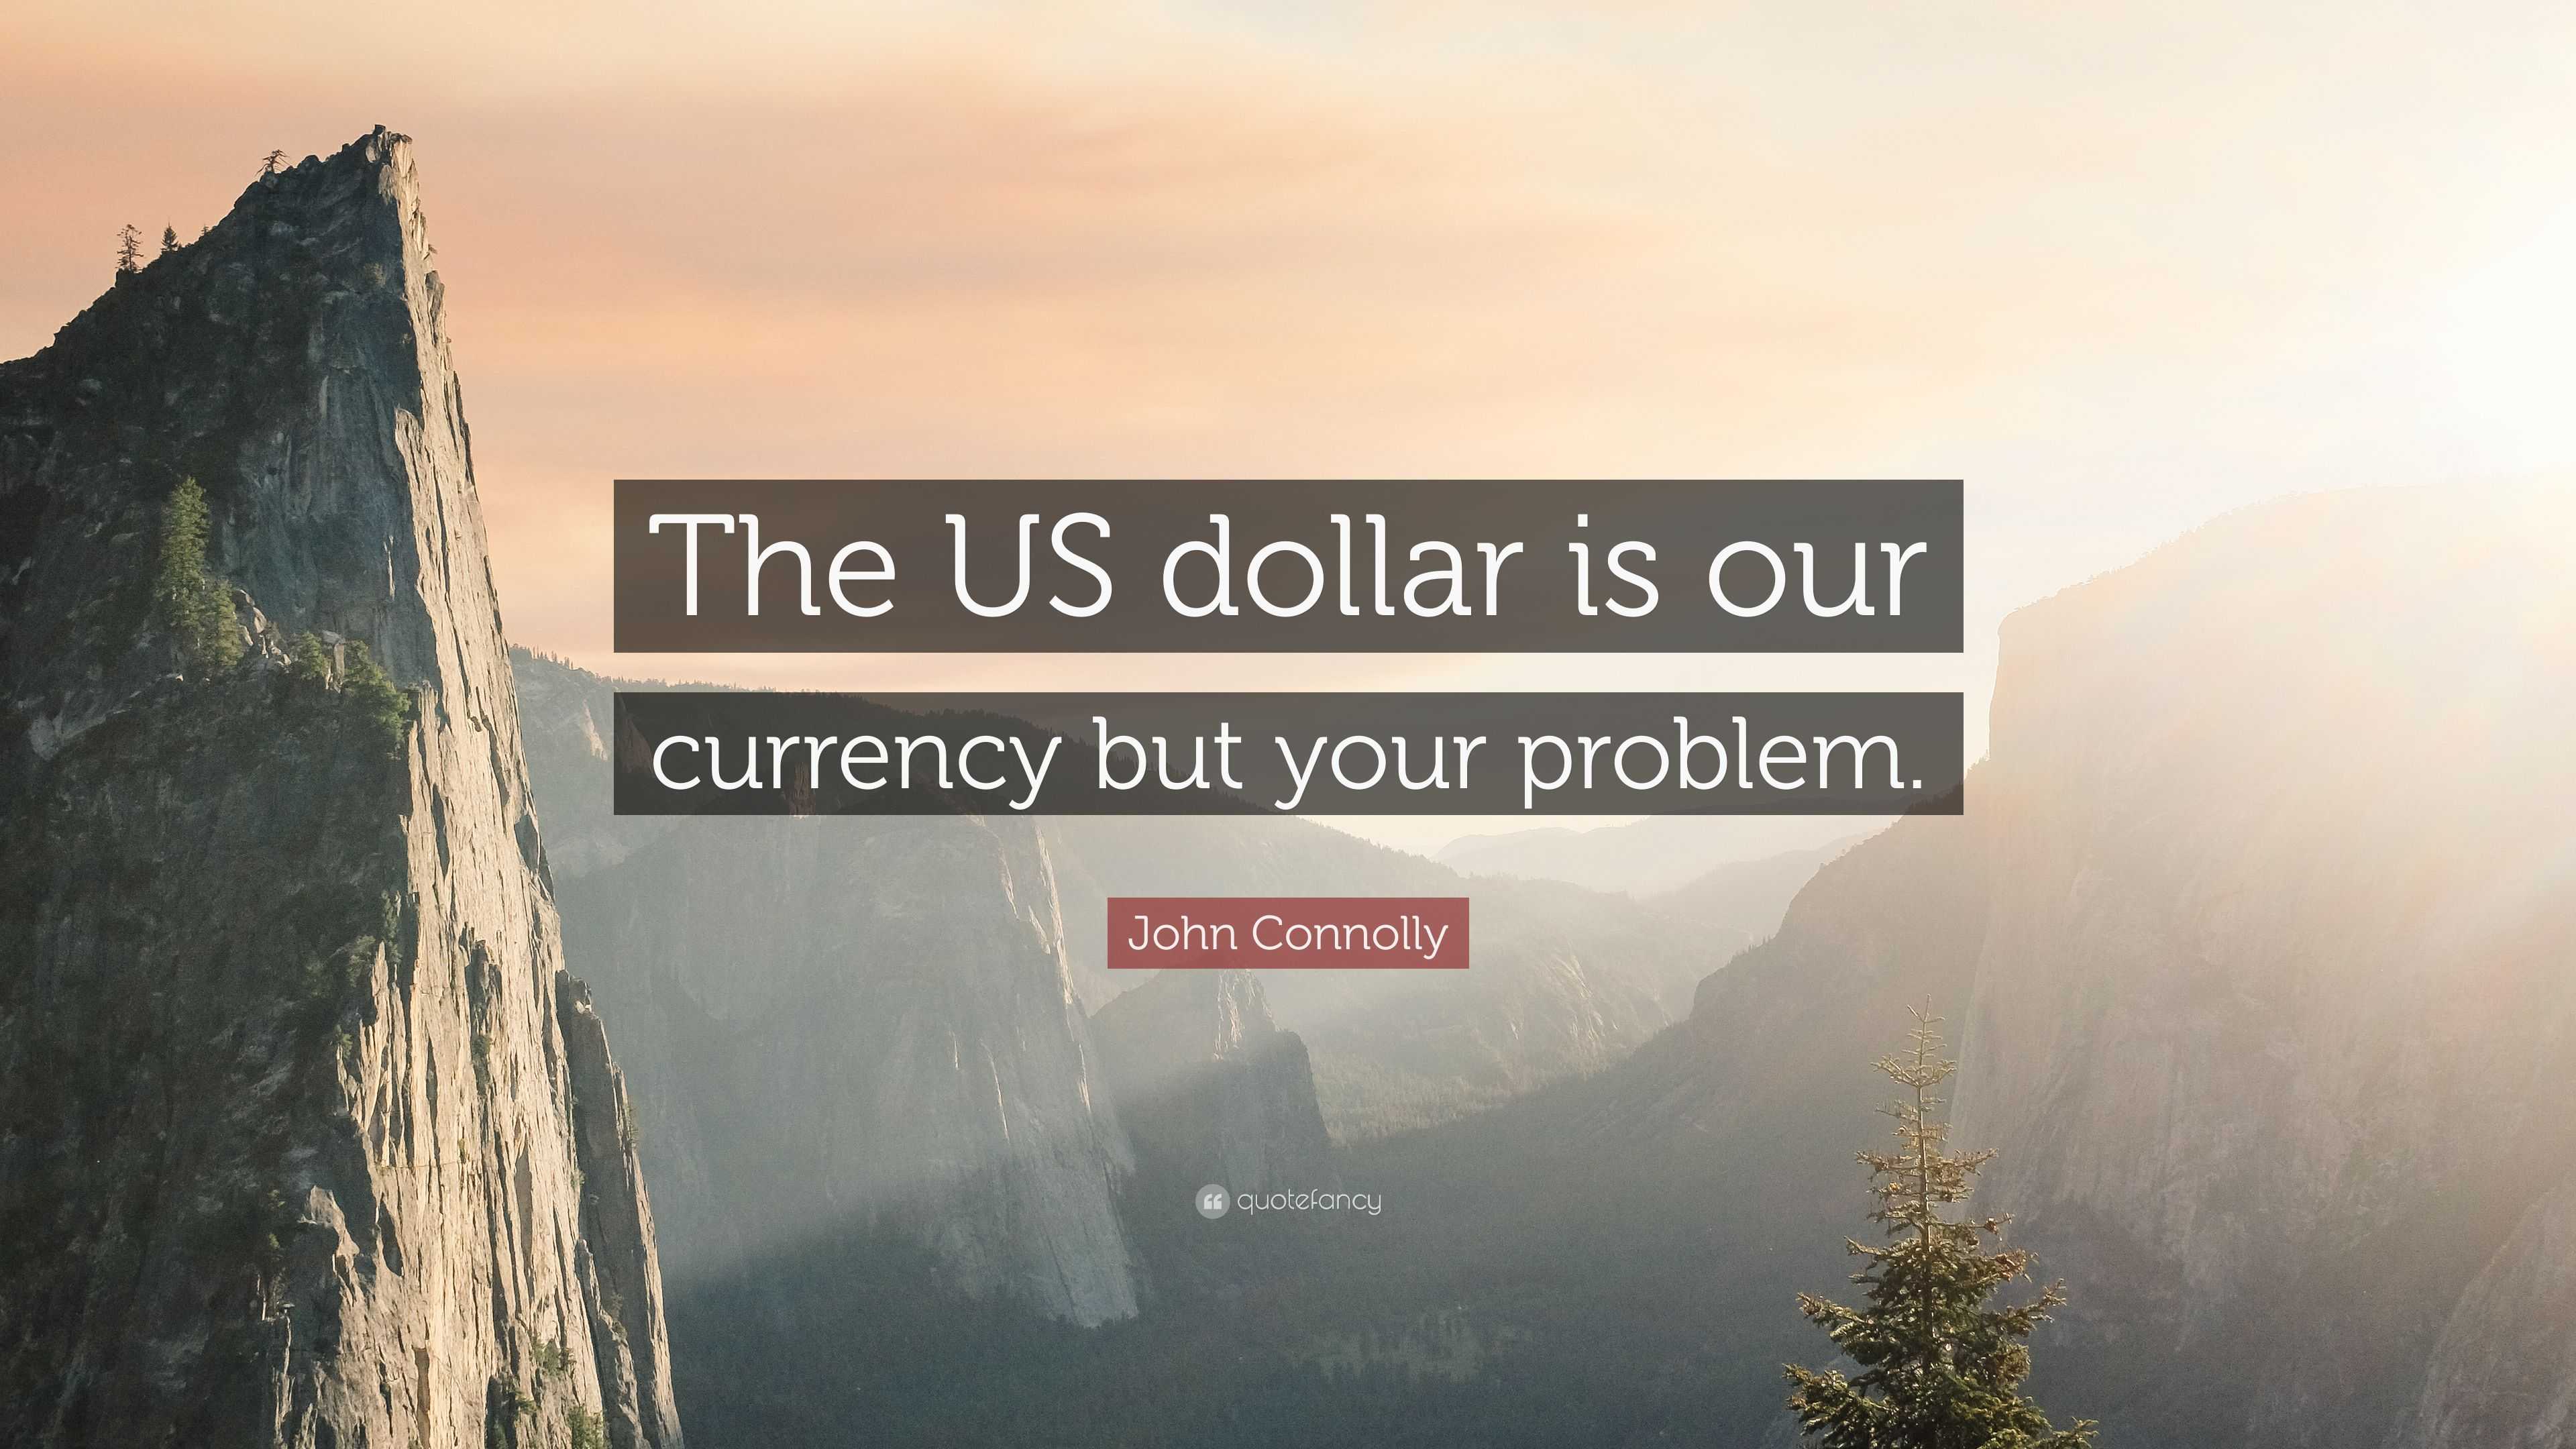 John Connolly Quote: “The US dollar is our currency but your problem.”